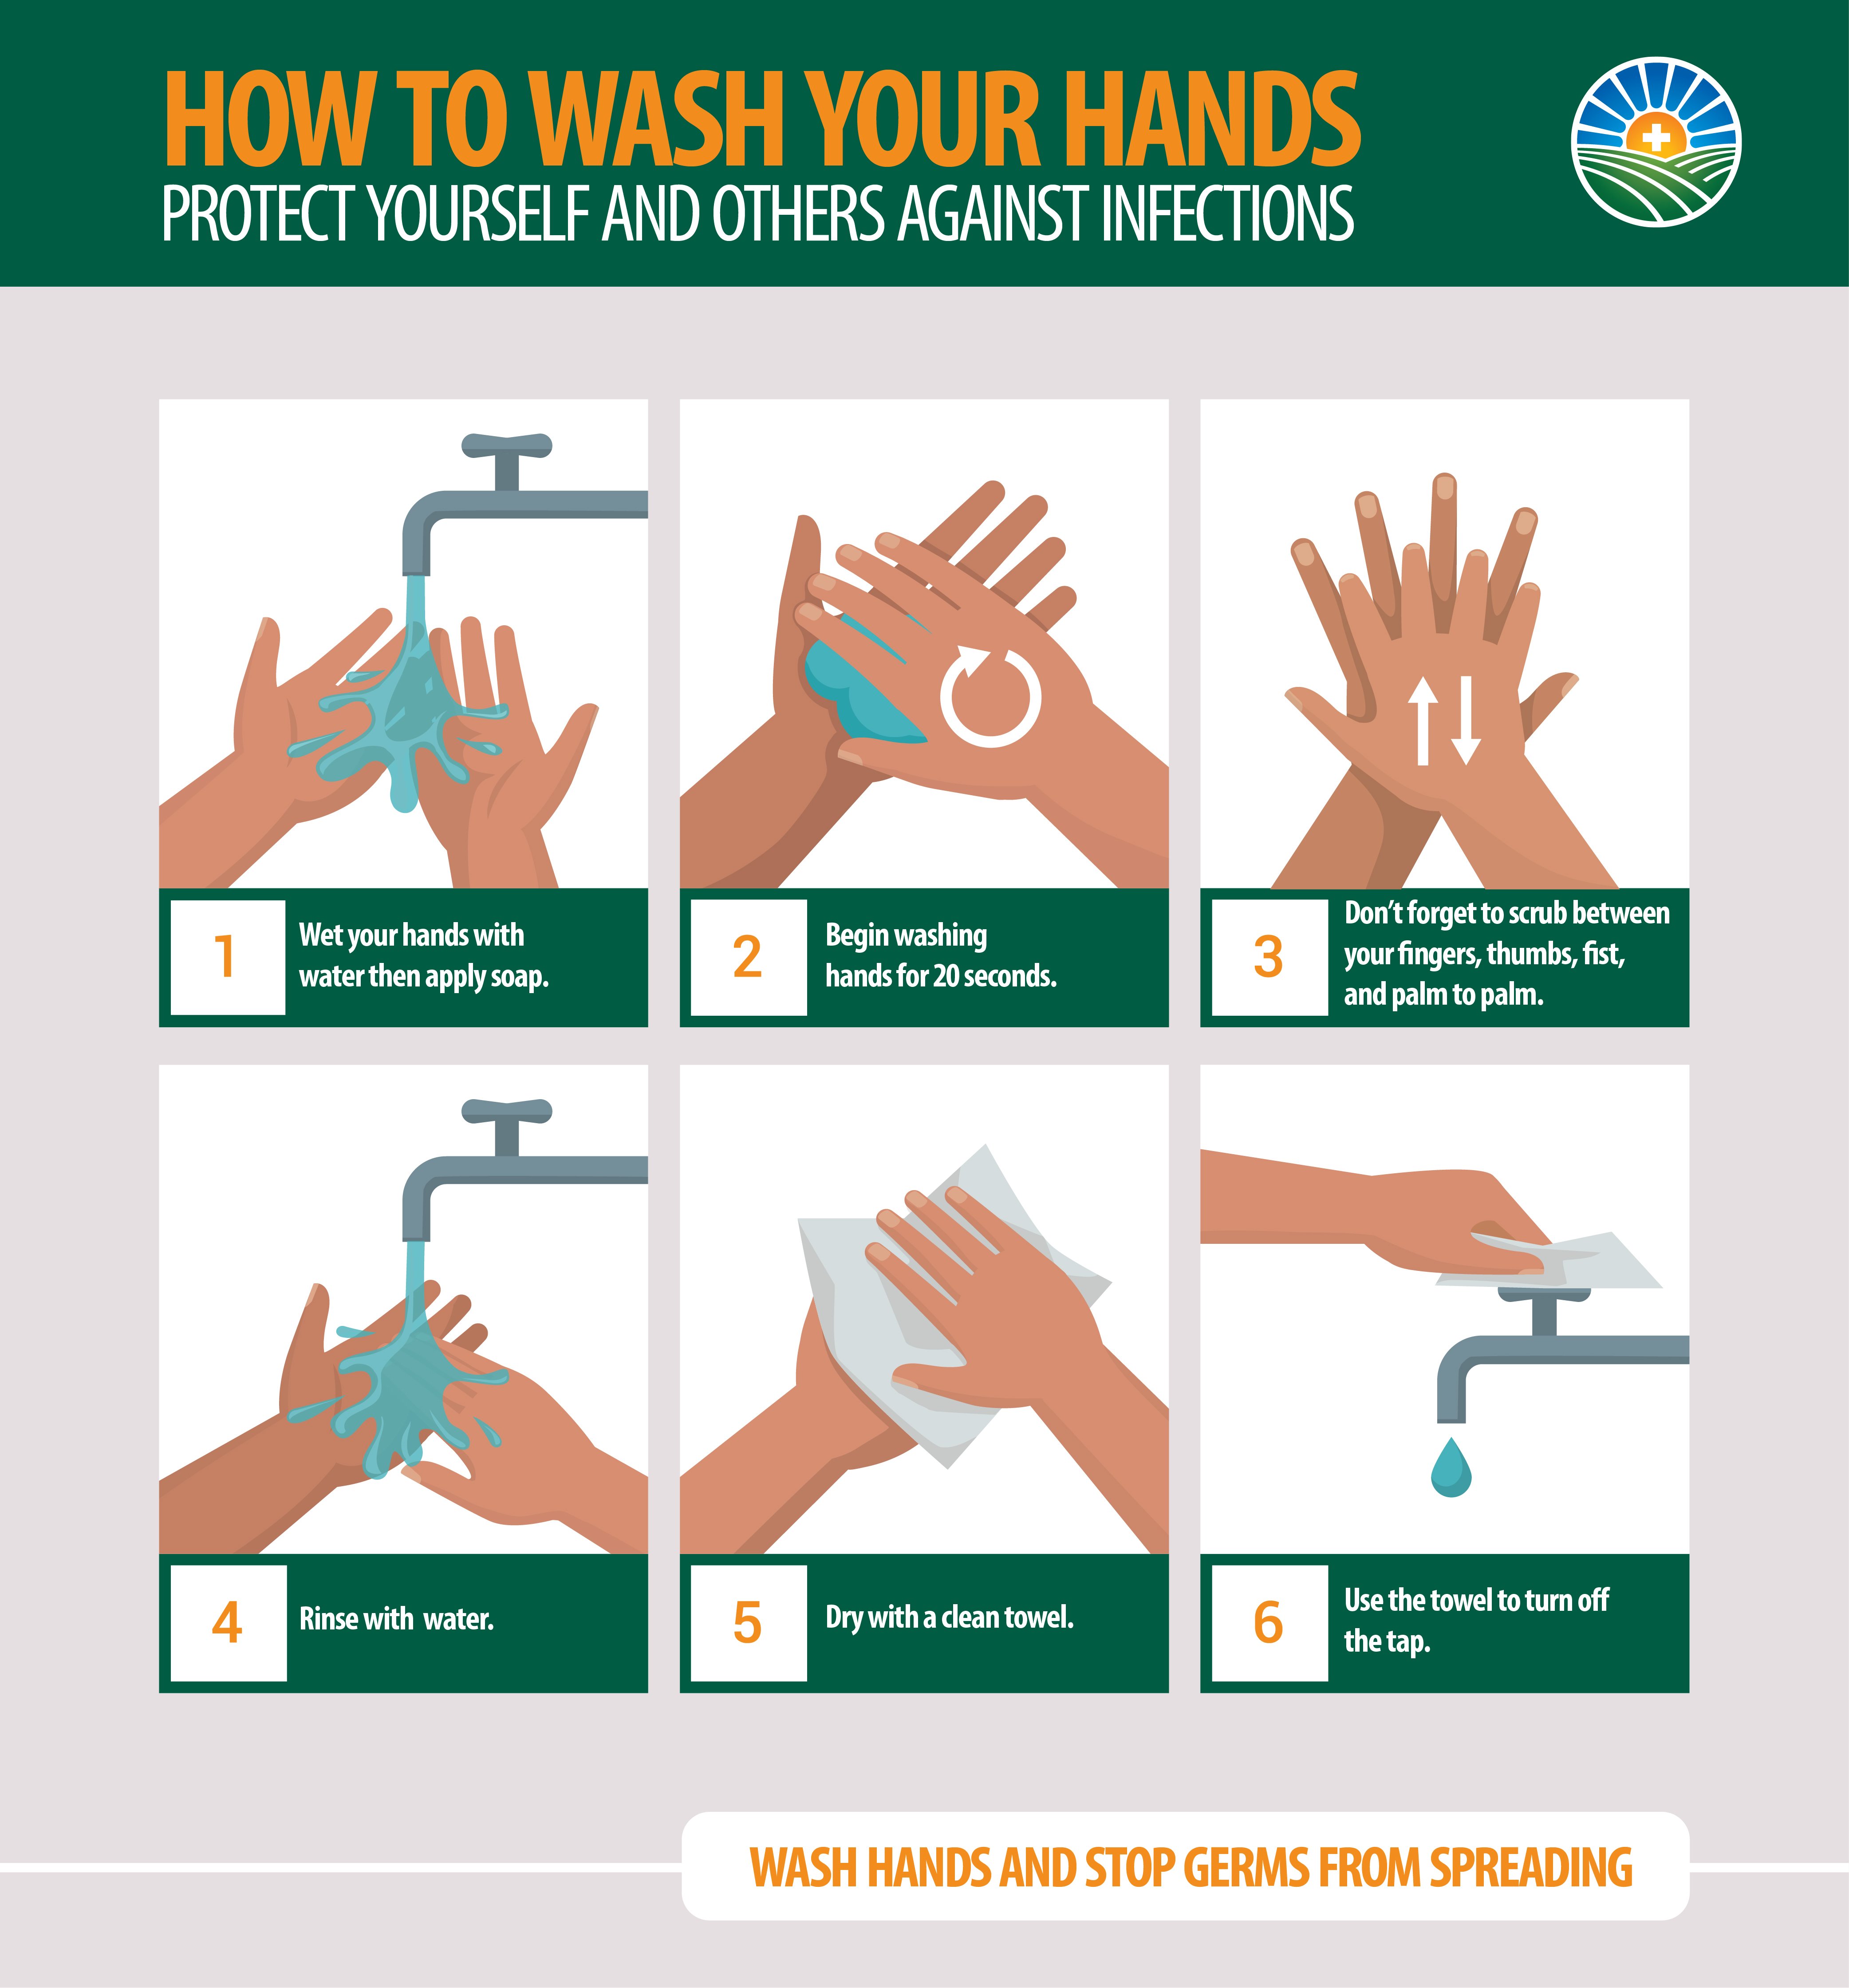 How to Wash Your Hands (Infographic)